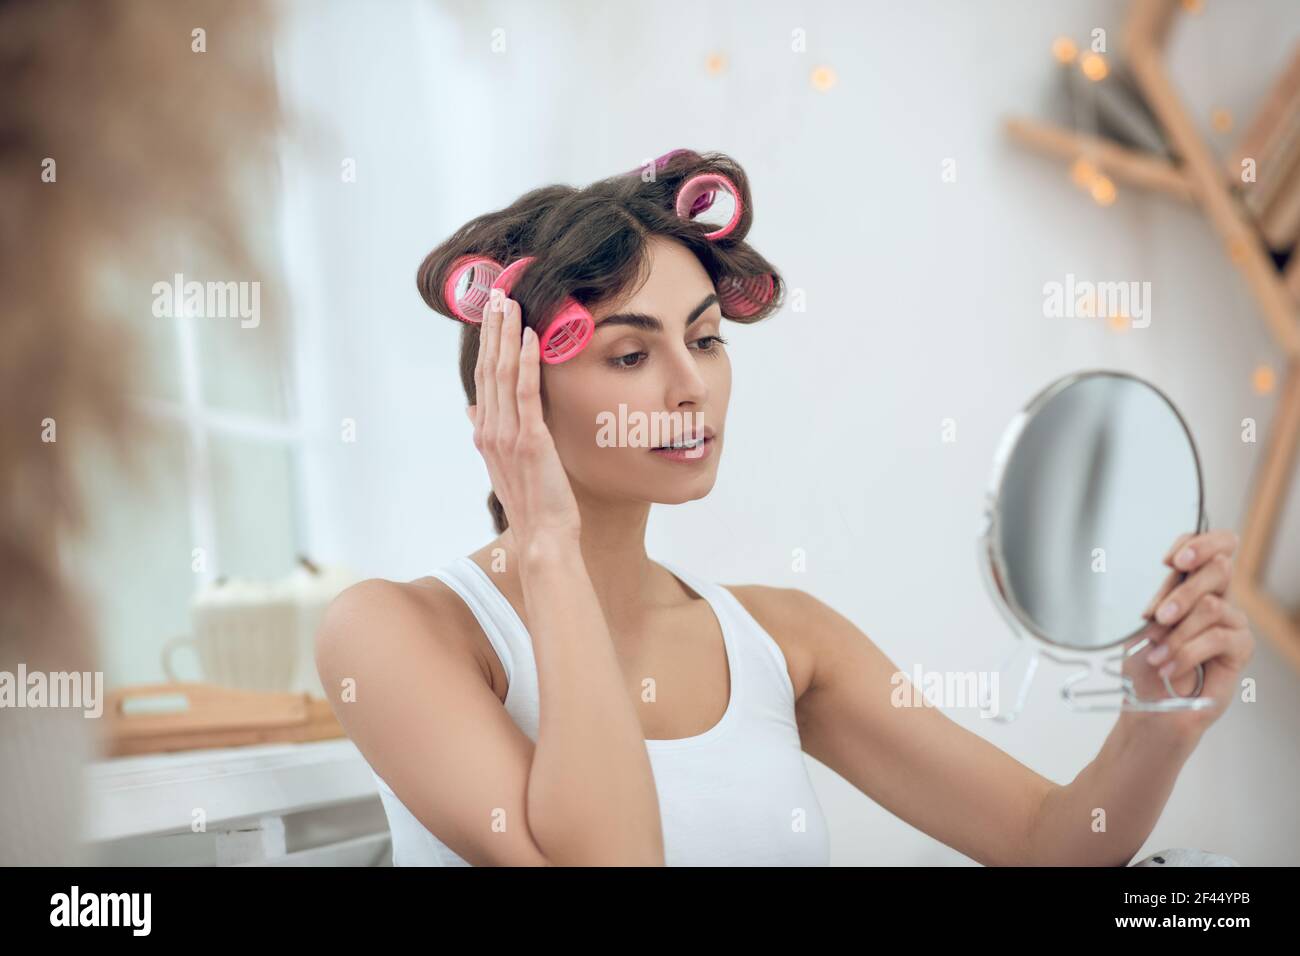 Nice-looking woman in curlers looking at herself in mirror Stock Photo